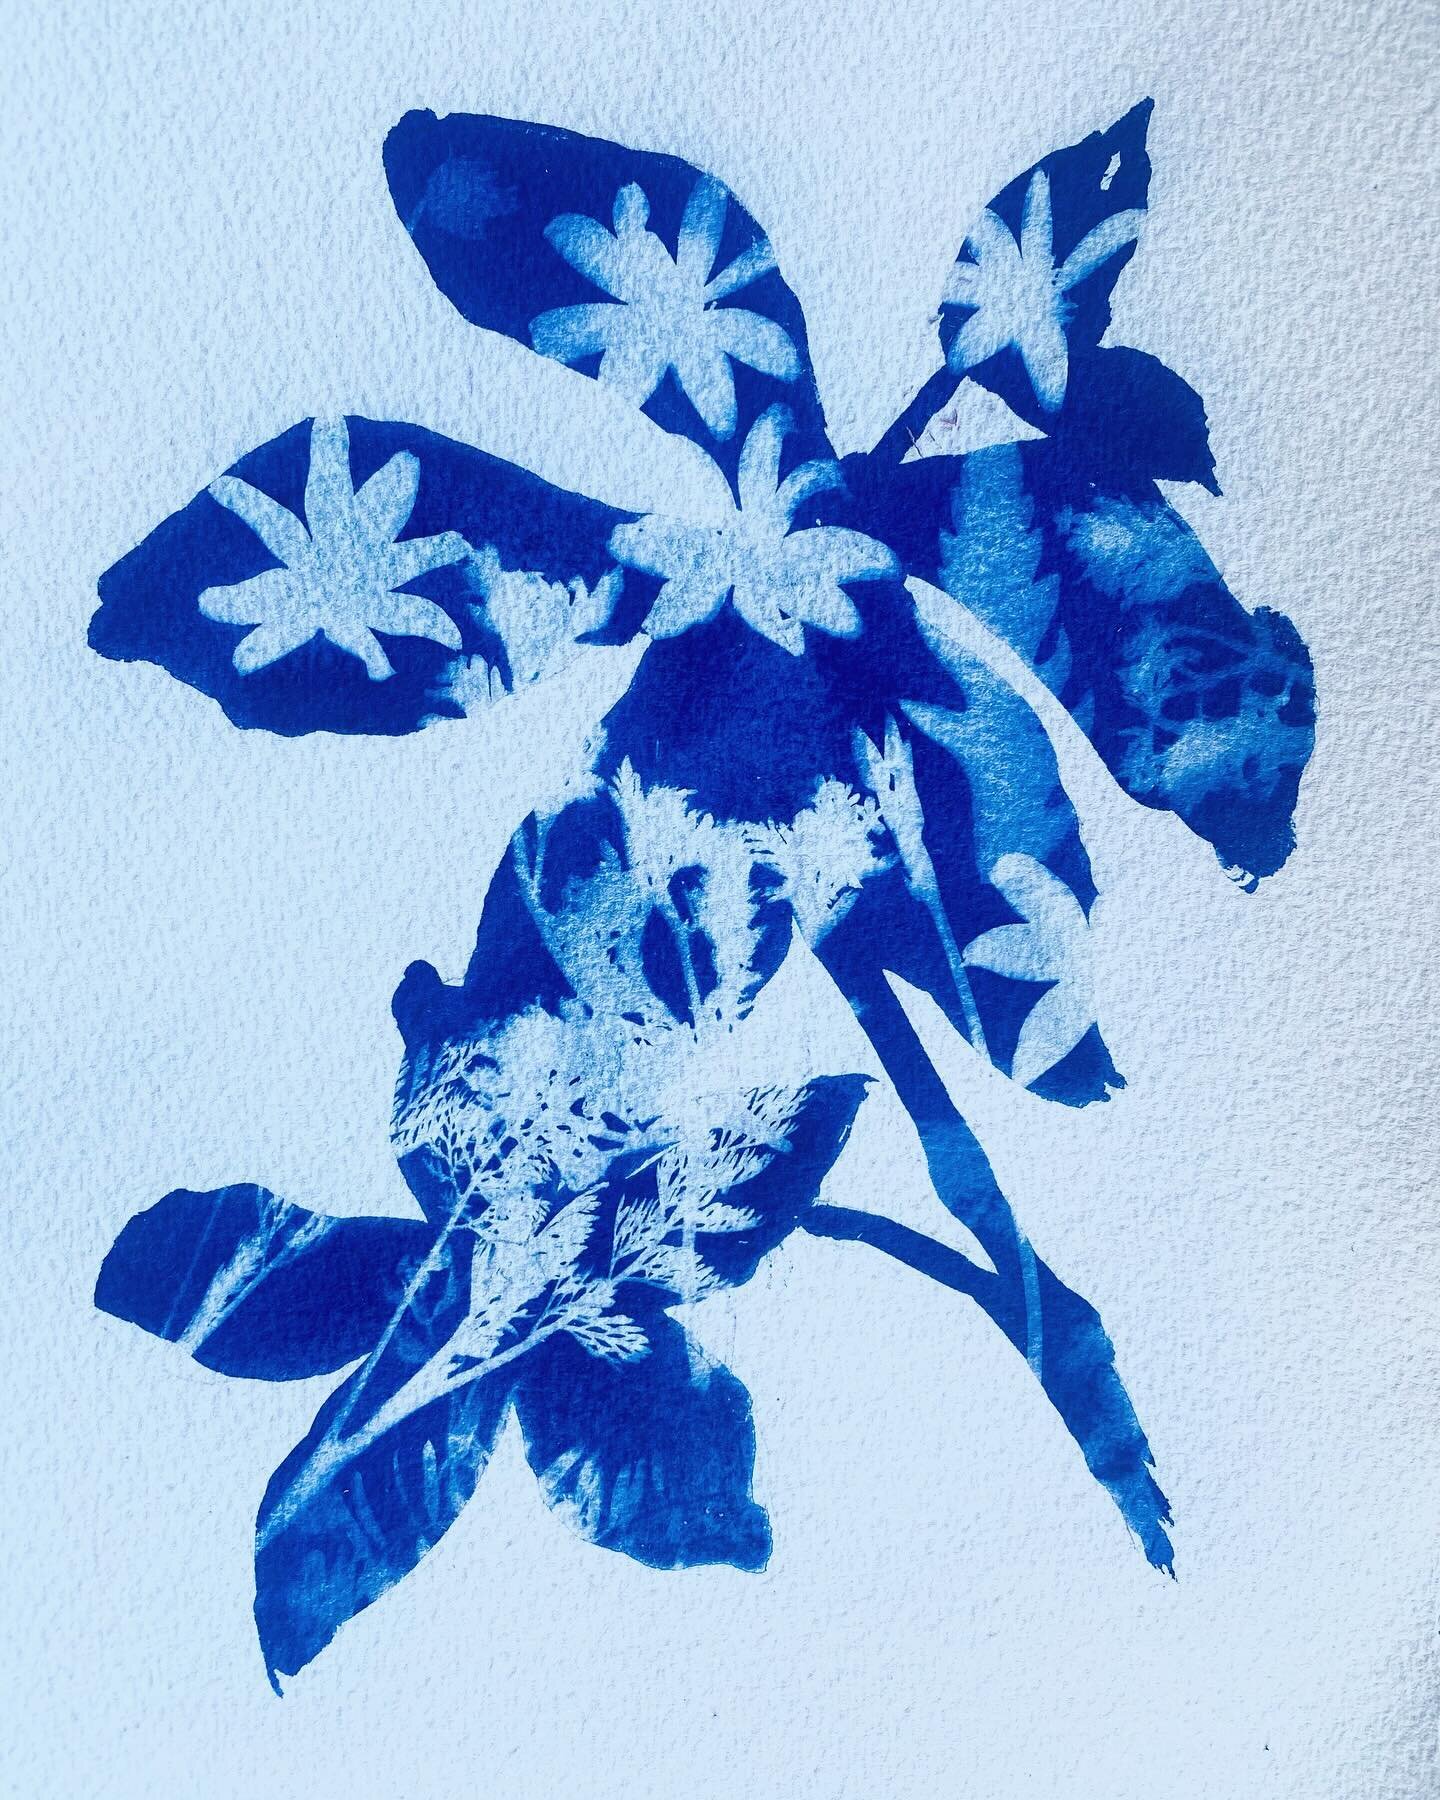 I&rsquo;m continuing to play with cyanotype, here inspired by Christine So @christinesogallery. (Beautiful work!) I was working fast and in the relative dark to paint the roses then once dry, took it outside to quickly lay out the wildflowers I had c